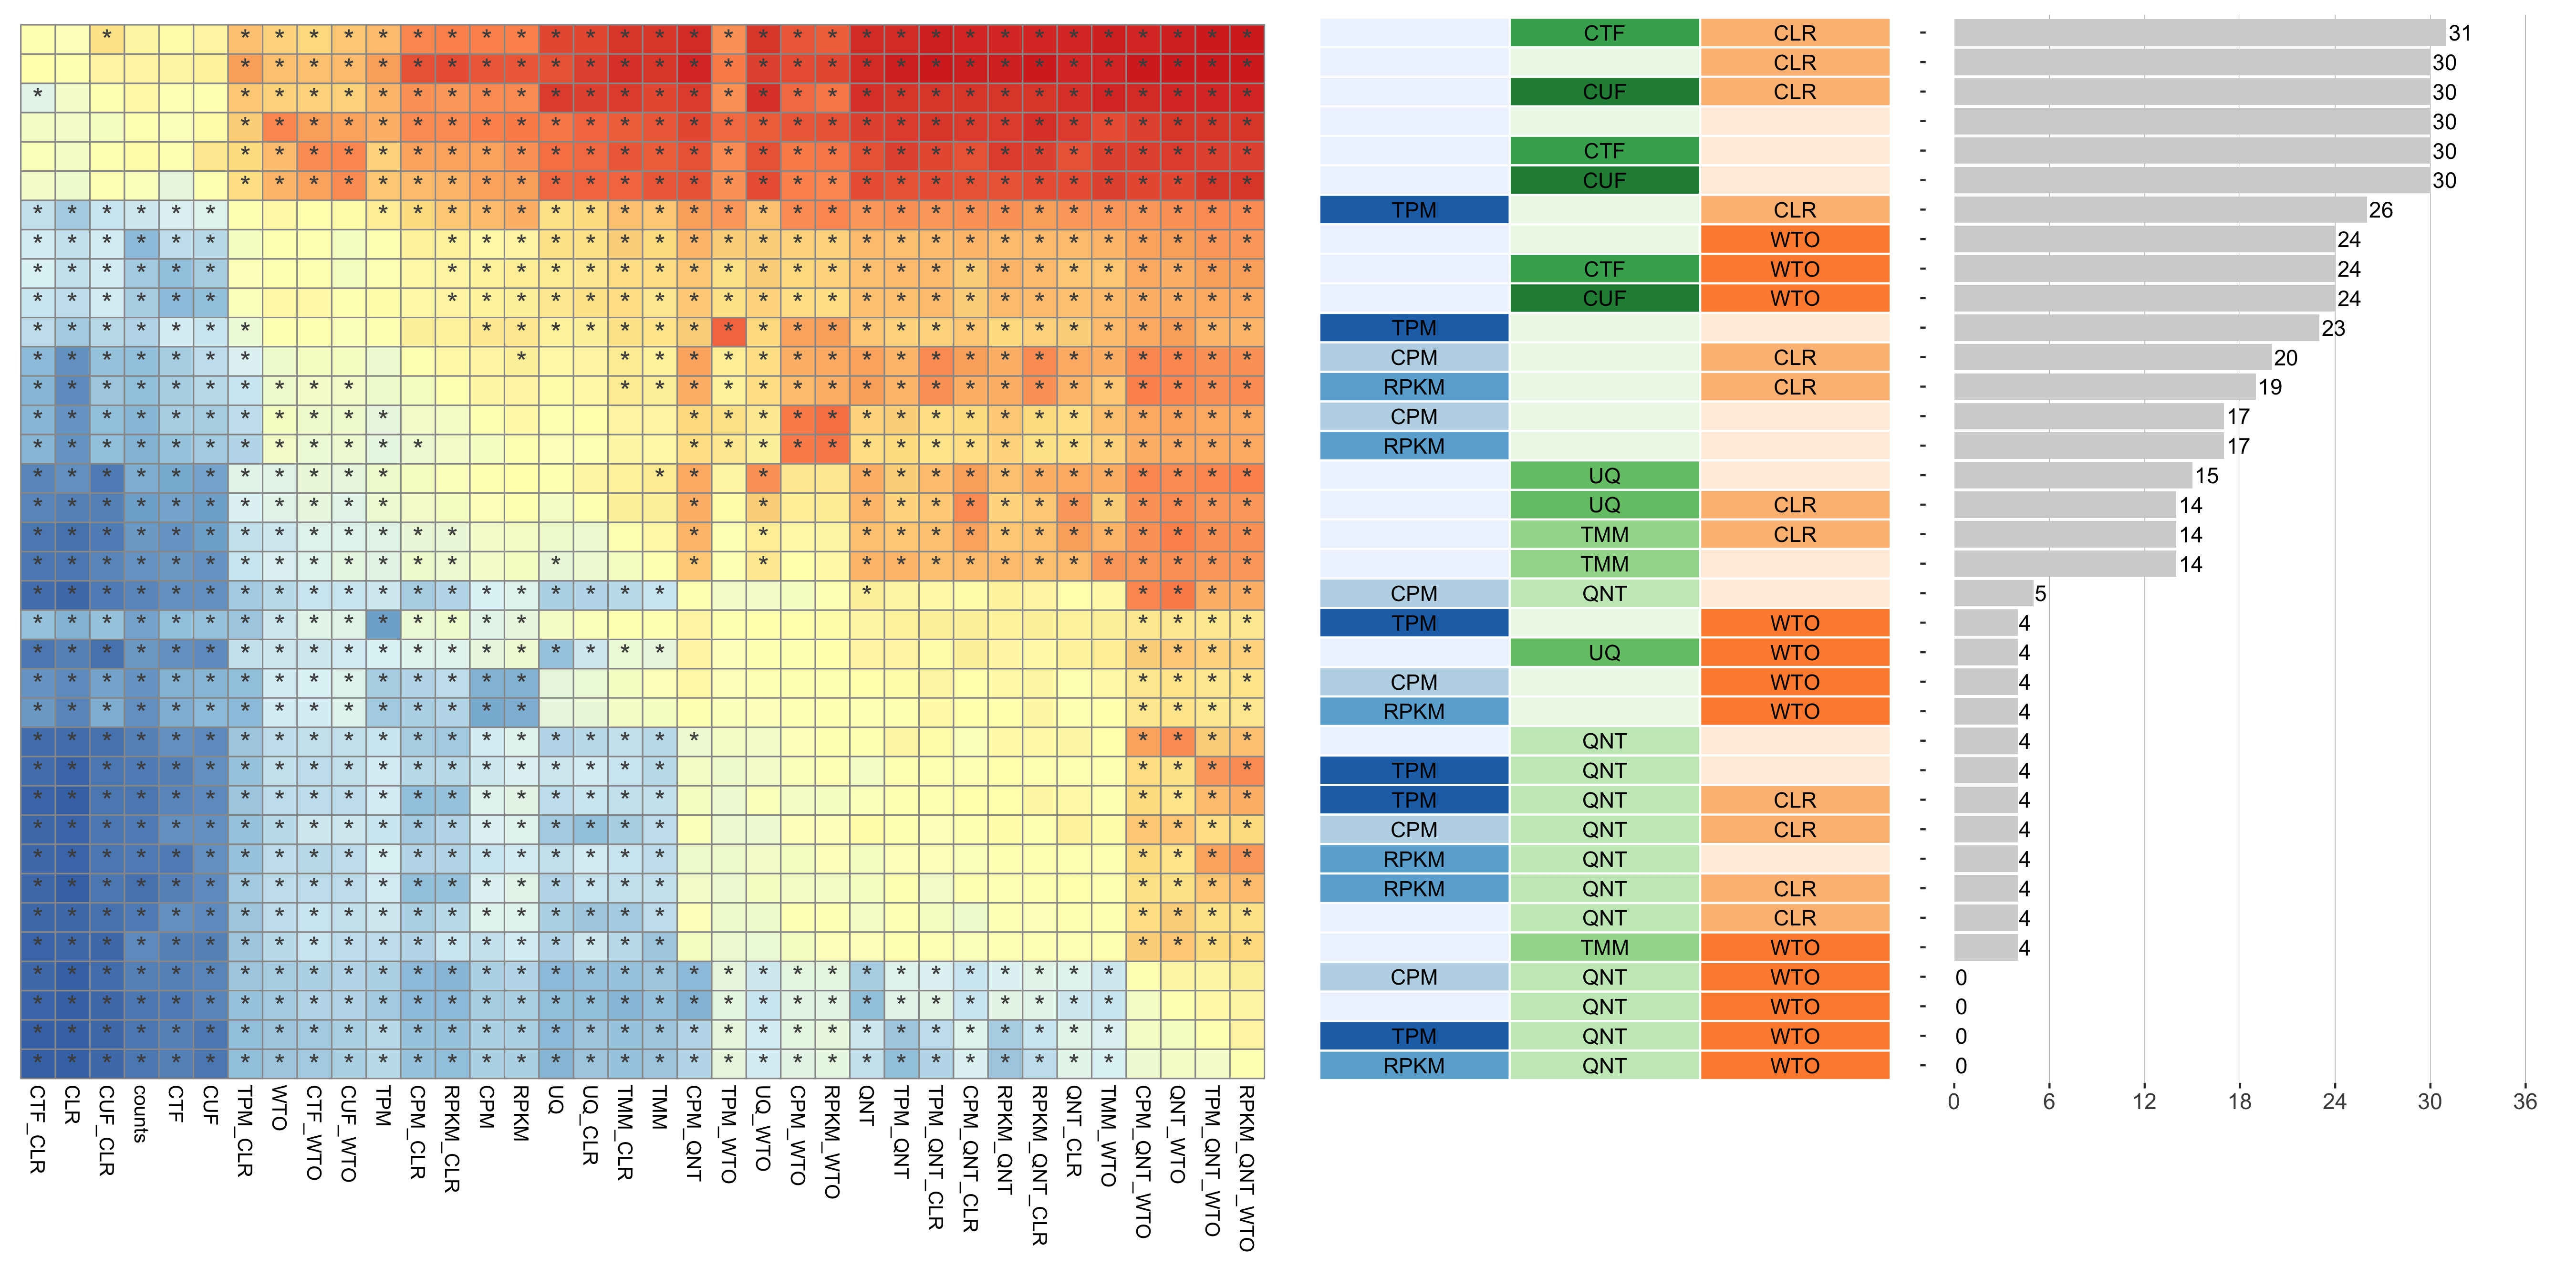 **Dataset-level pairwise comparison of workflow performance.** (**left**) The heatmap shows the relative performance of a pair of workflows, corresponding to a row and a column, directly compared to each other for the SRA datasets based on the tissue-aware gold standard. The color in each cell (row, column) represents the proportion of datasets for which the workflow along the row has a higher auROC than the workflow along the column. Comparisons that are statistically significant (corrected p < 0.01) based on a paired Wilcoxon test are marked with an asterisk. (**middle**) The workflows (rows) are described in terms of the specific method used in the within-sample normalization (blues), between-sample normalization (greens), and network transformation (oranges) stages. (**right**) The barplot shows the number of times each workflow was significantly greater than another workflow.